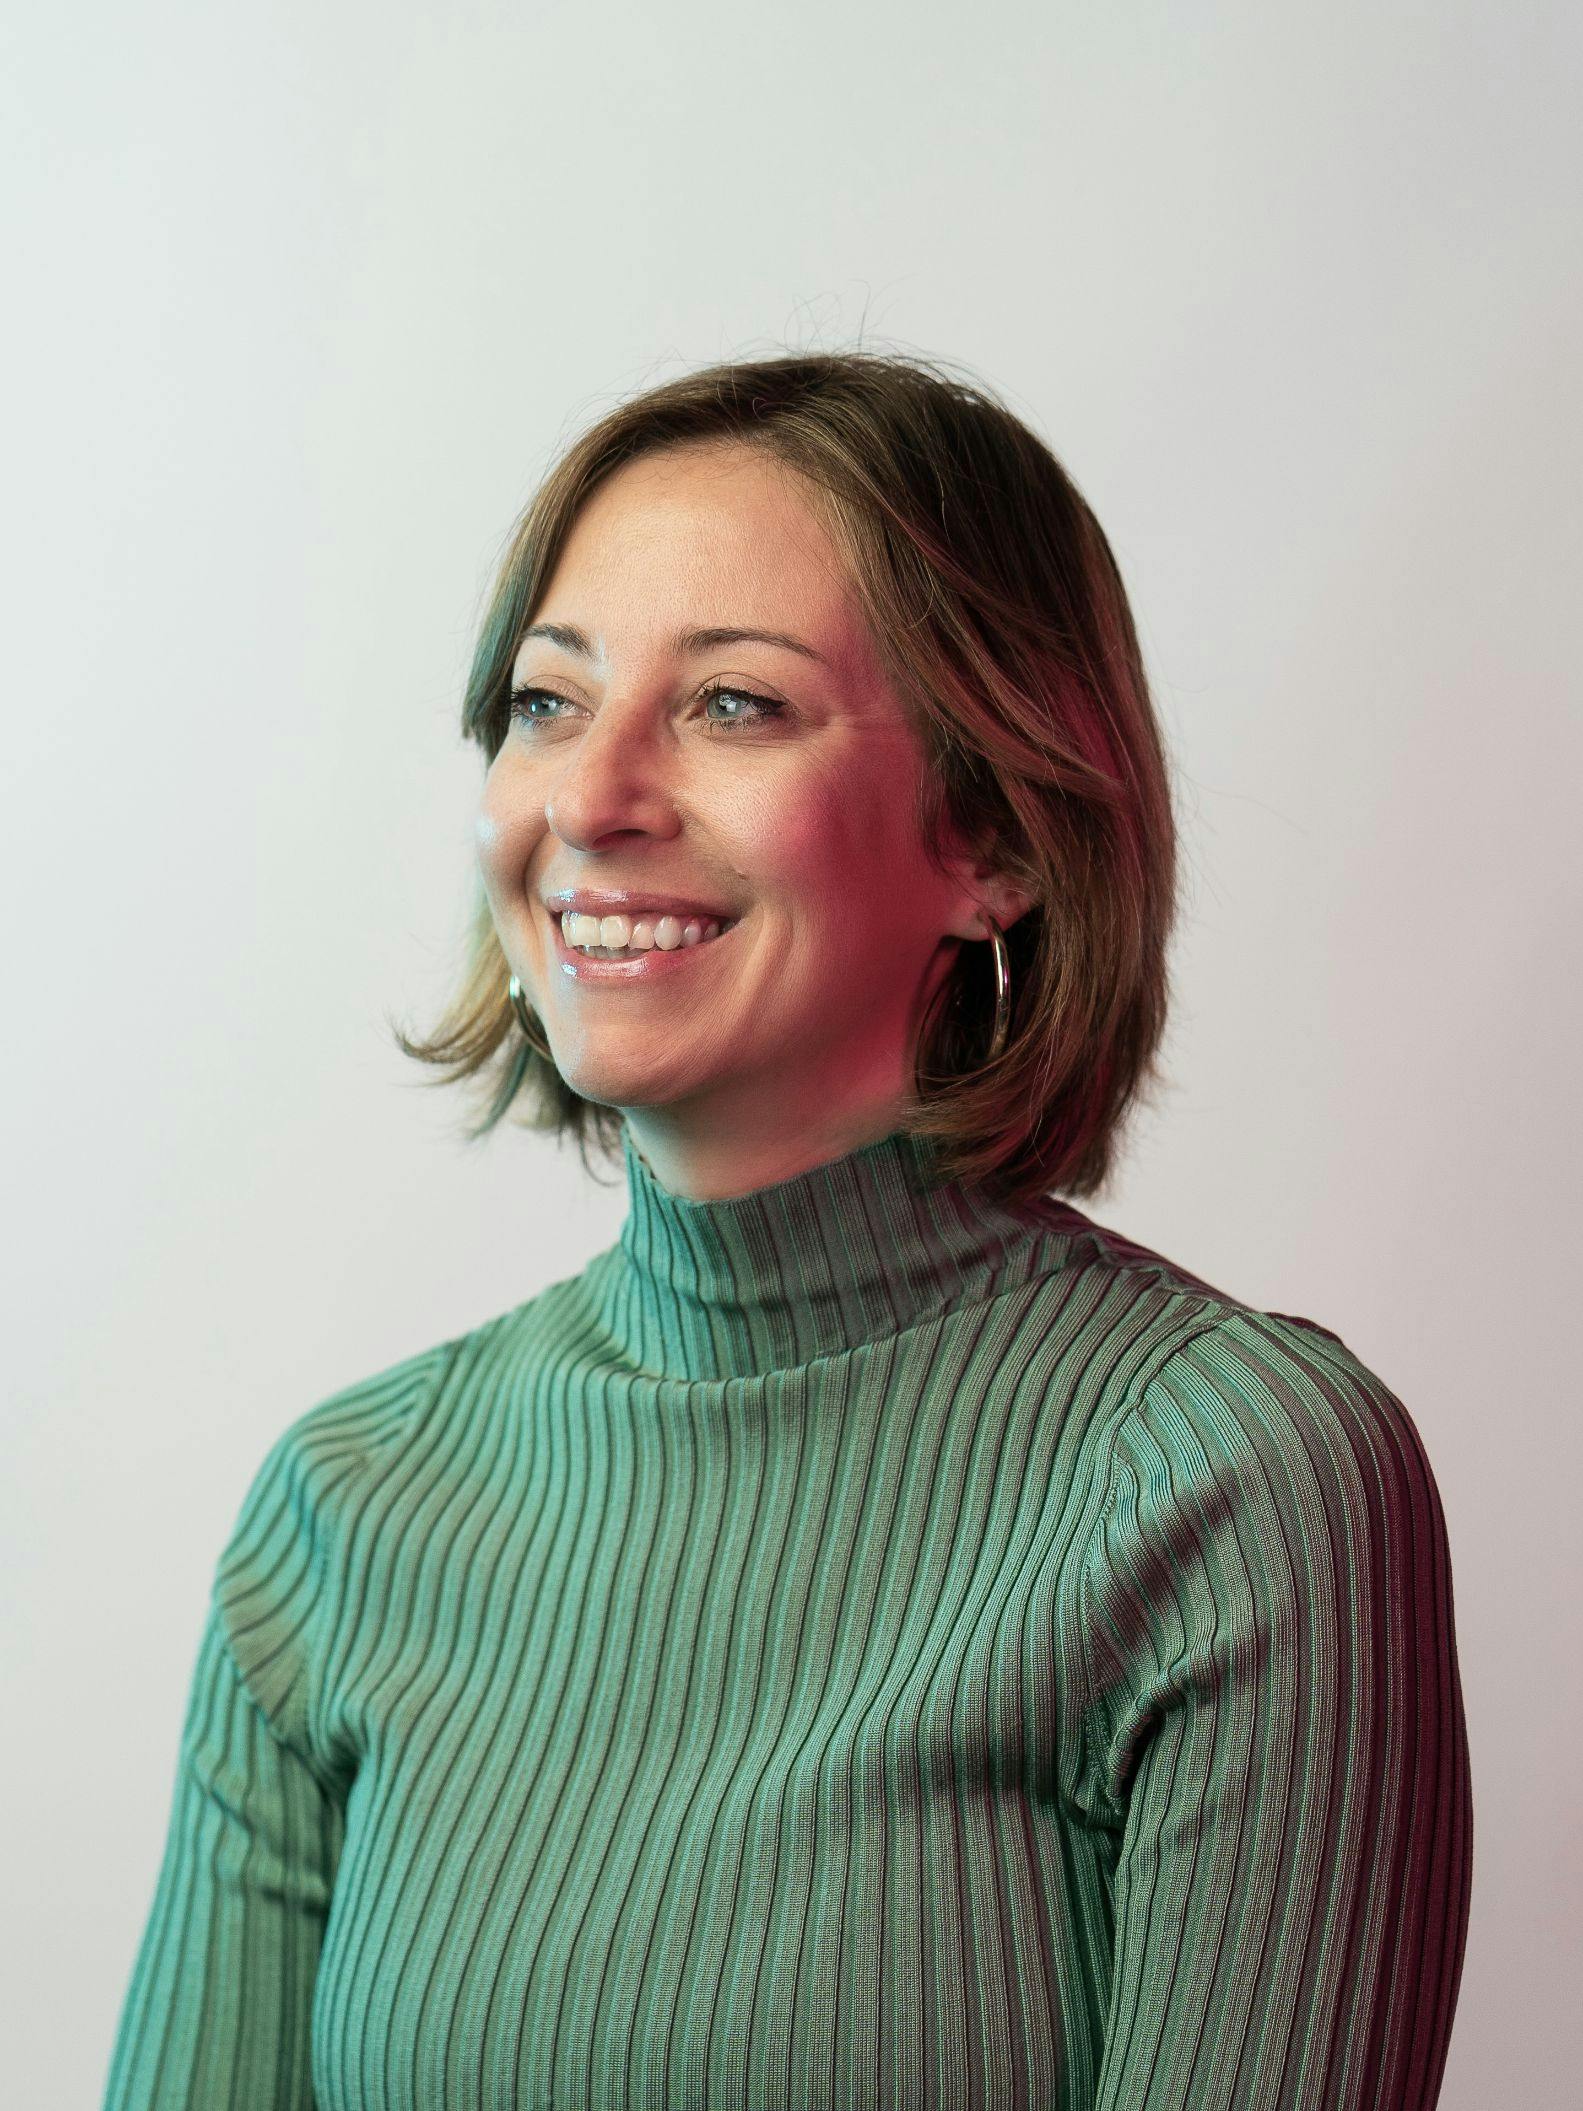 Francesca Perona, Head of Product at Modern Synthesis